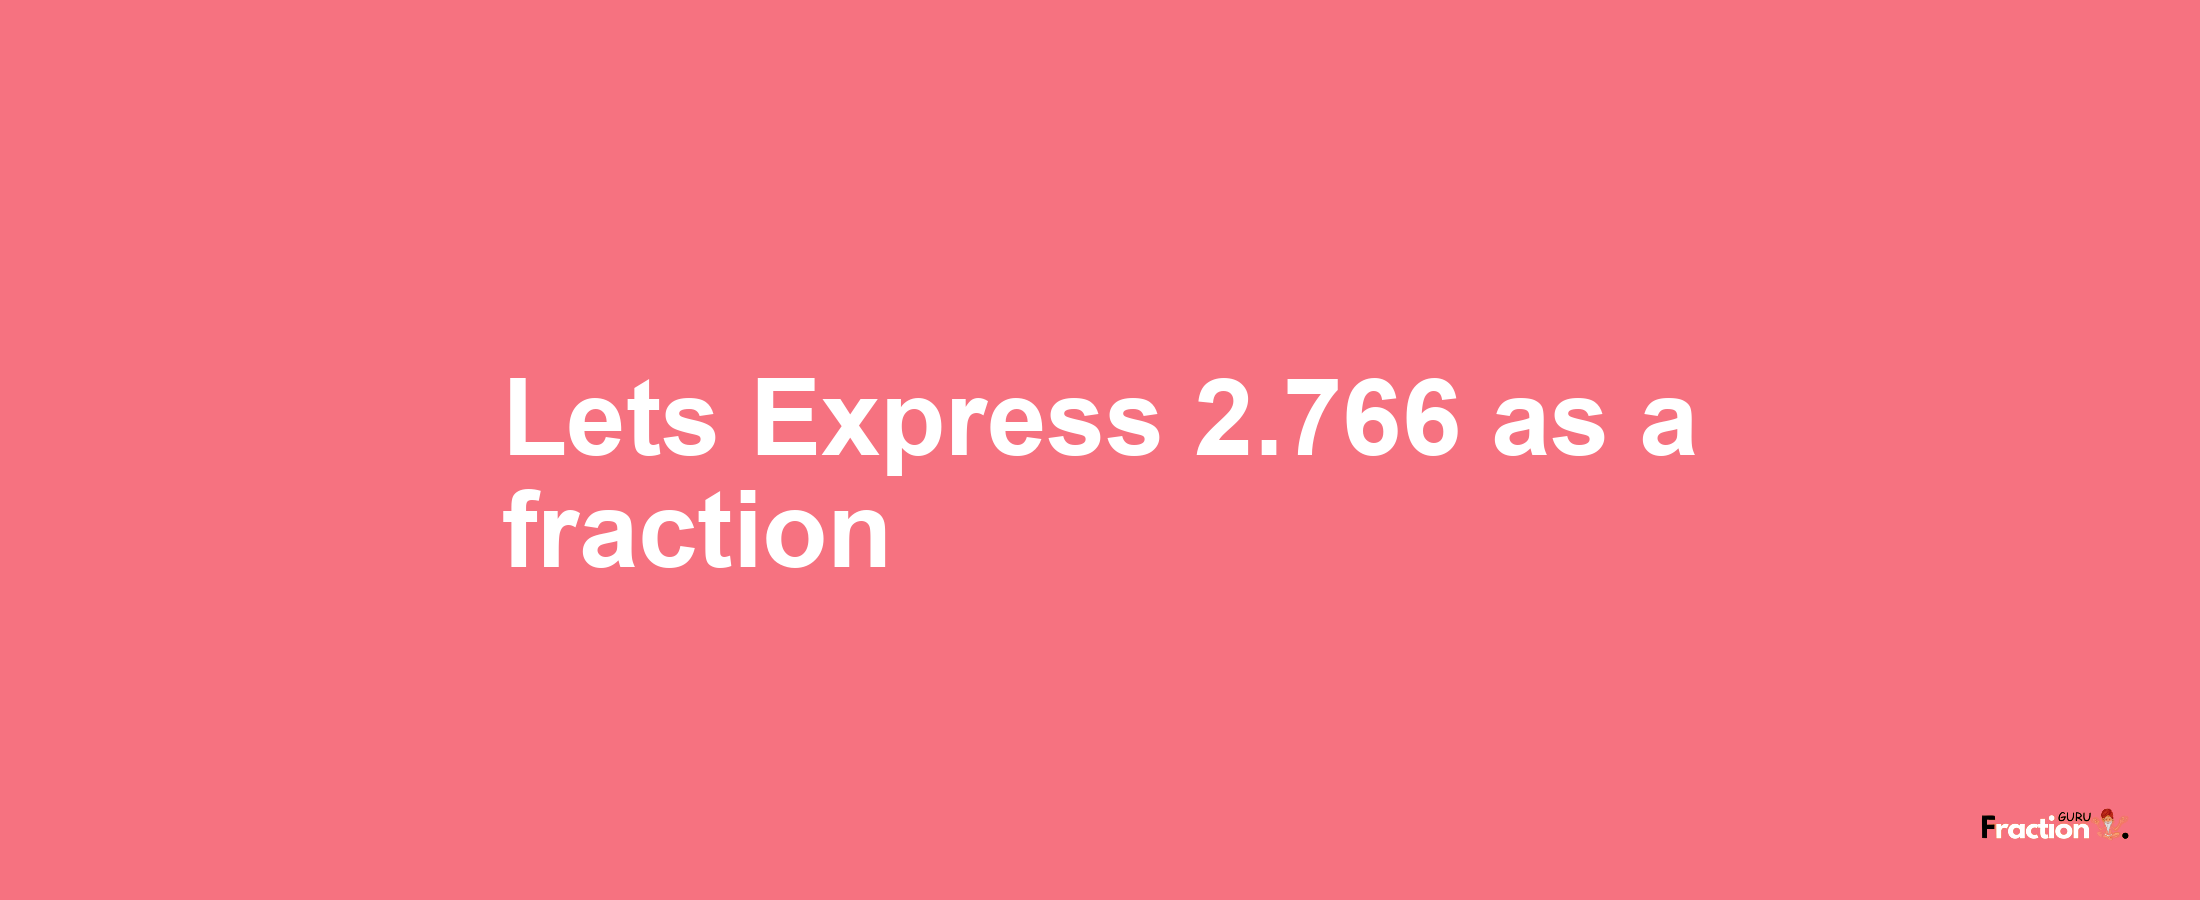 Lets Express 2.766 as afraction